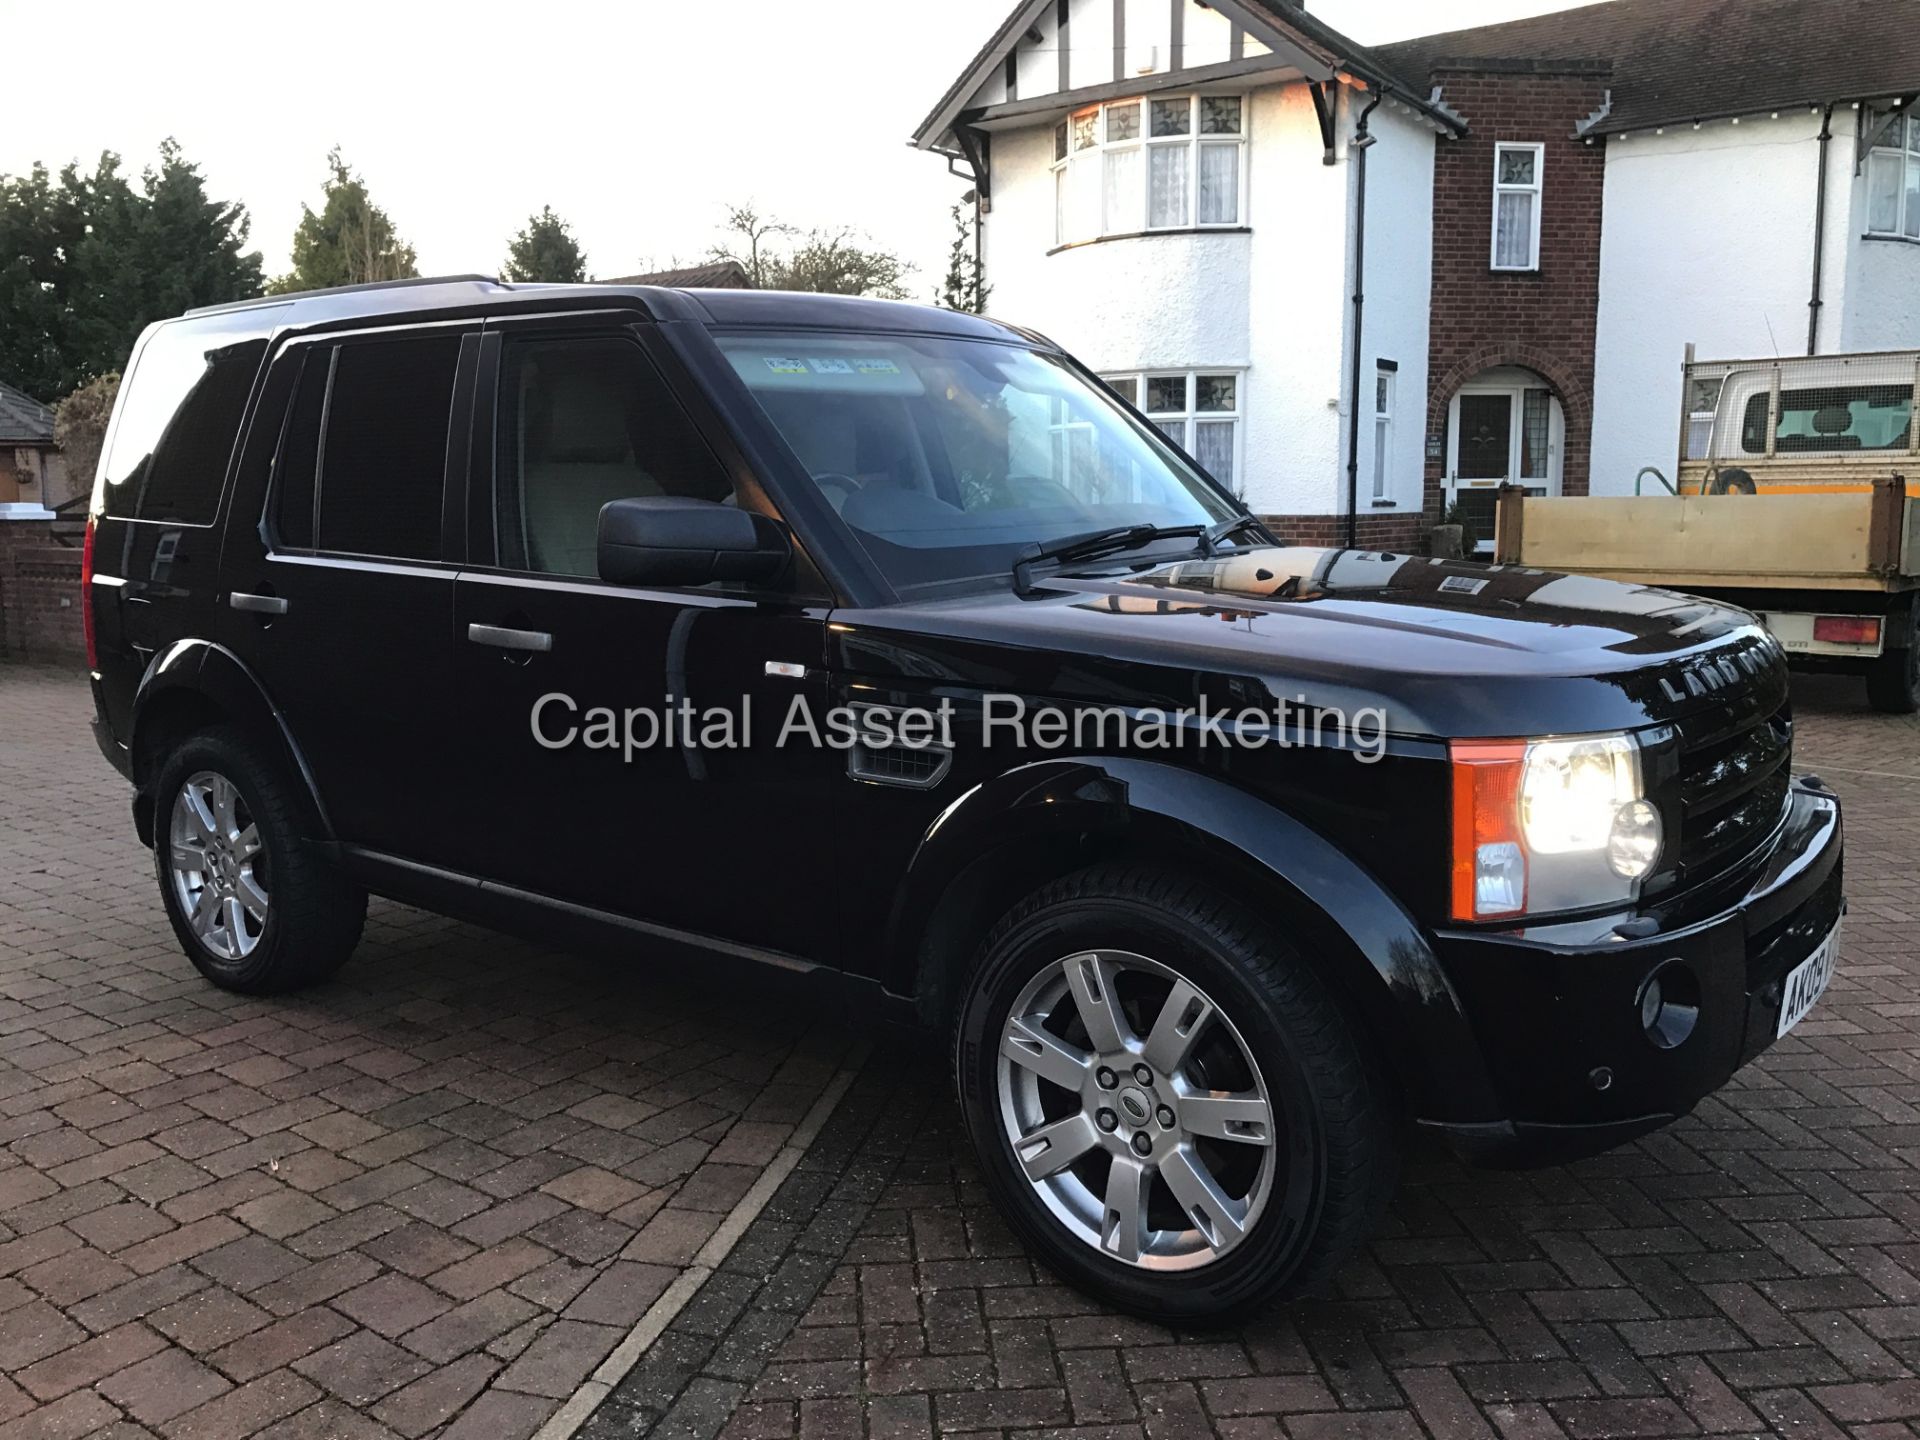 LANDROVER DISCOVERY 3 "TDV6" AUTO - (BLACK EDITION) - 09 REG - SAT NAV - LEATHER - 7 SEATER - WOW!! - Image 3 of 30